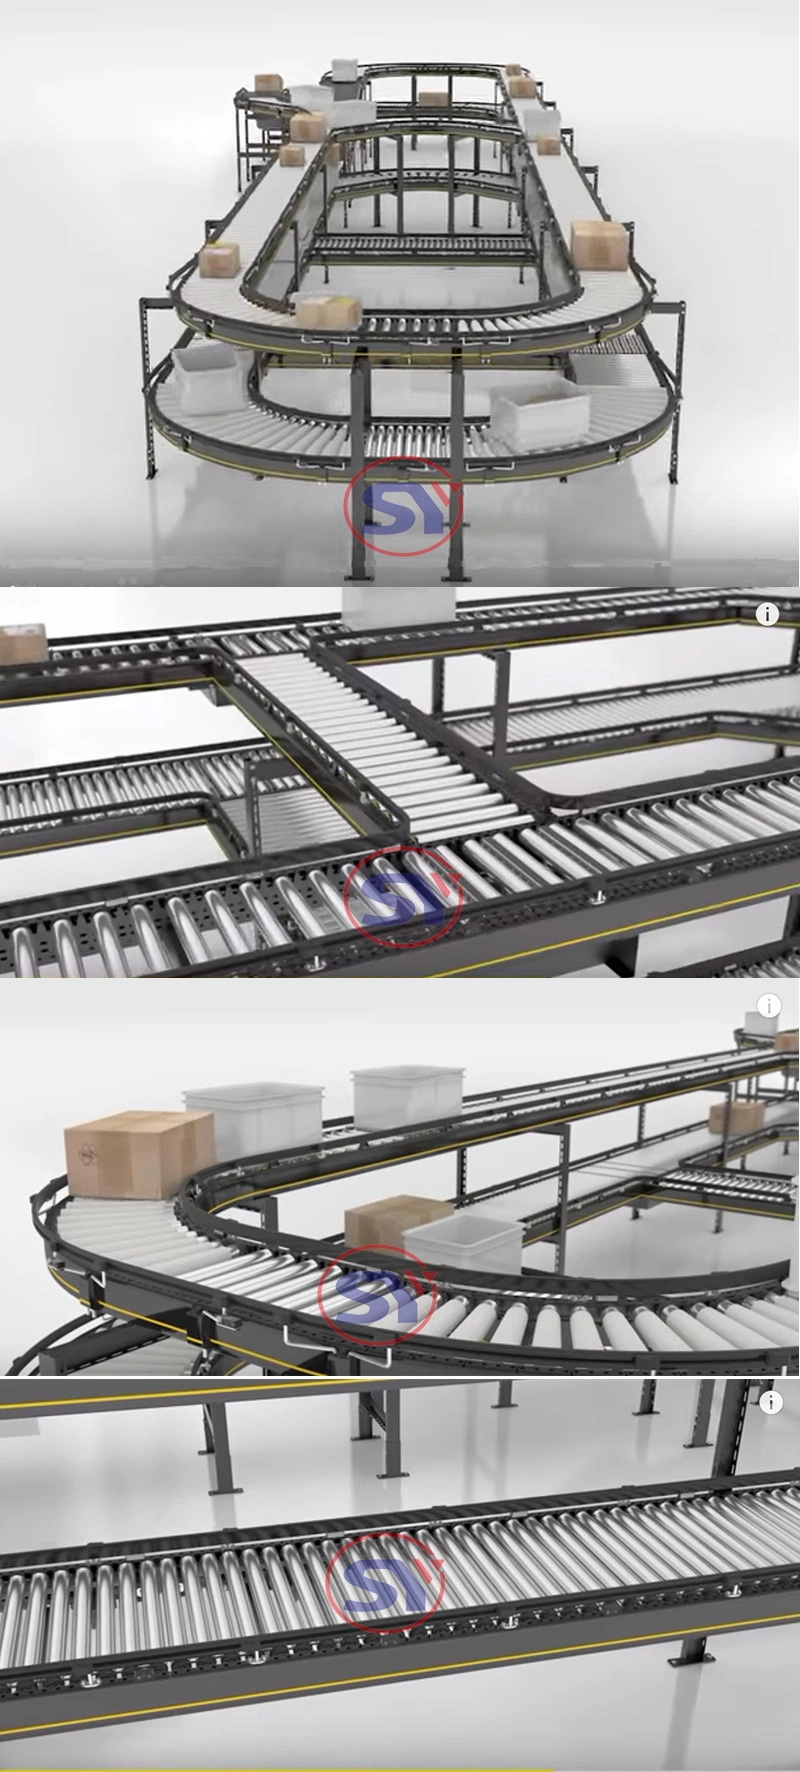 Large Loading Capacity Linear&Horizontal Roll Roller Conveyor with Guardrail